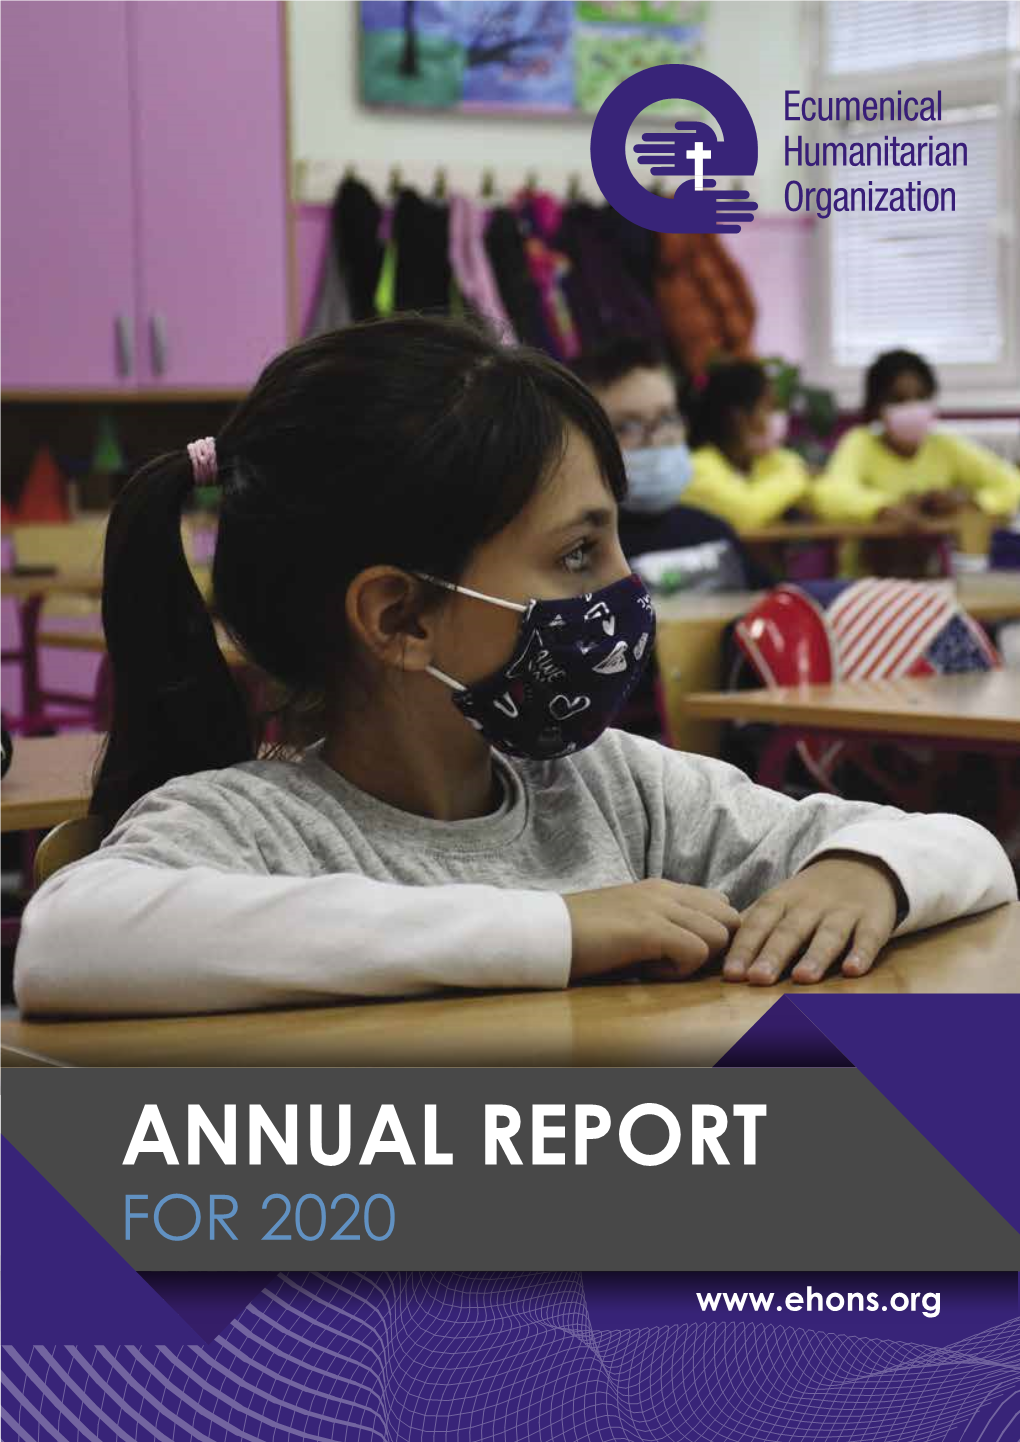 Annual Report for 2020 Introduction